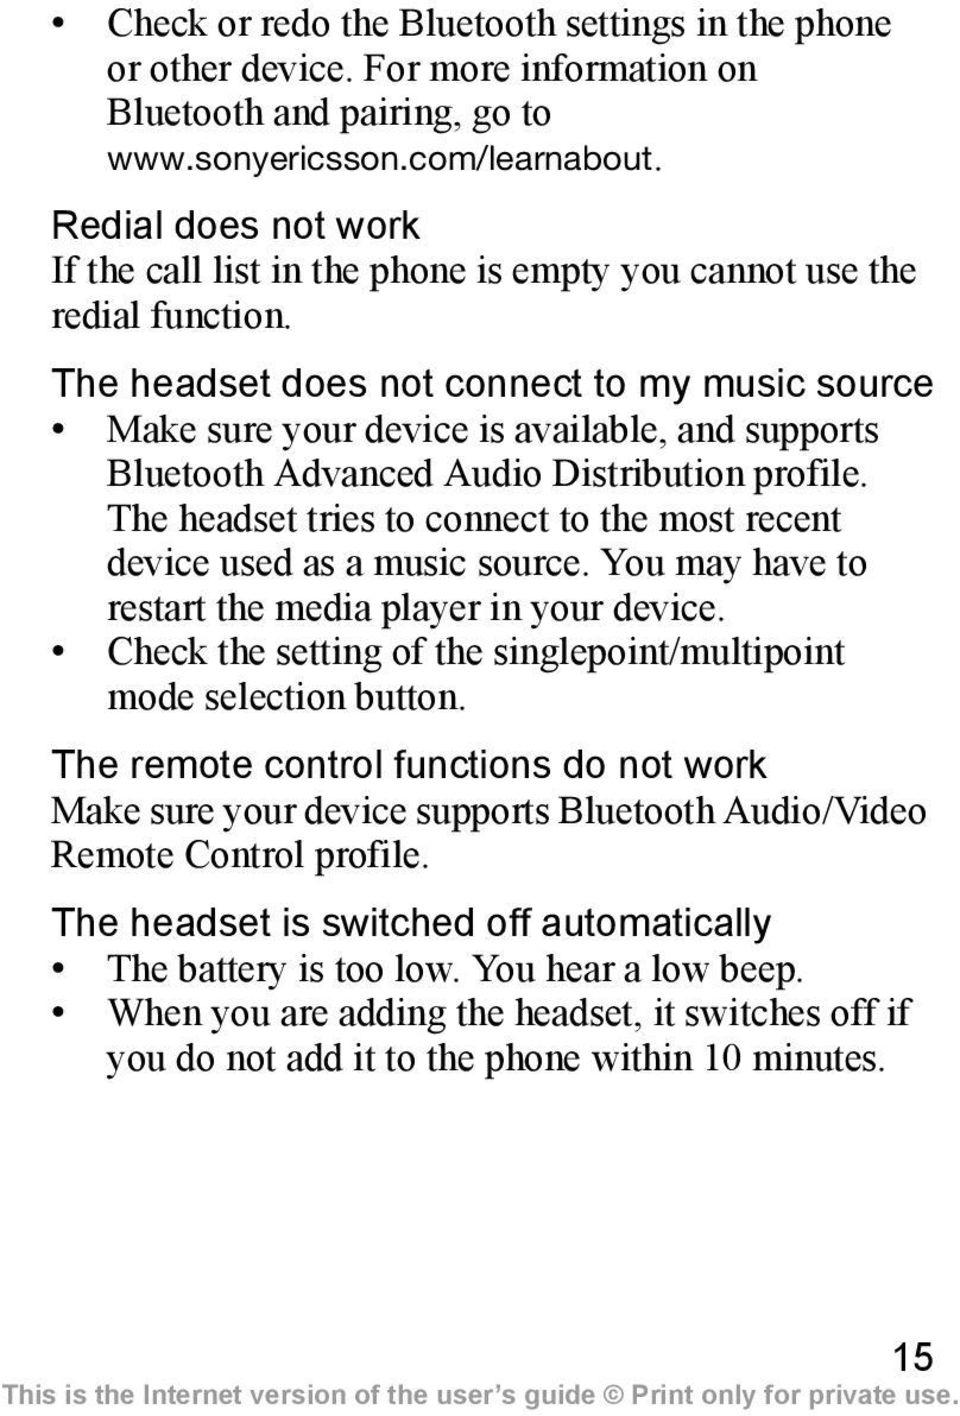 The headset does not connect to my music source Make sure your device is available, and supports Bluetooth Advanced Audio Distribution profile.